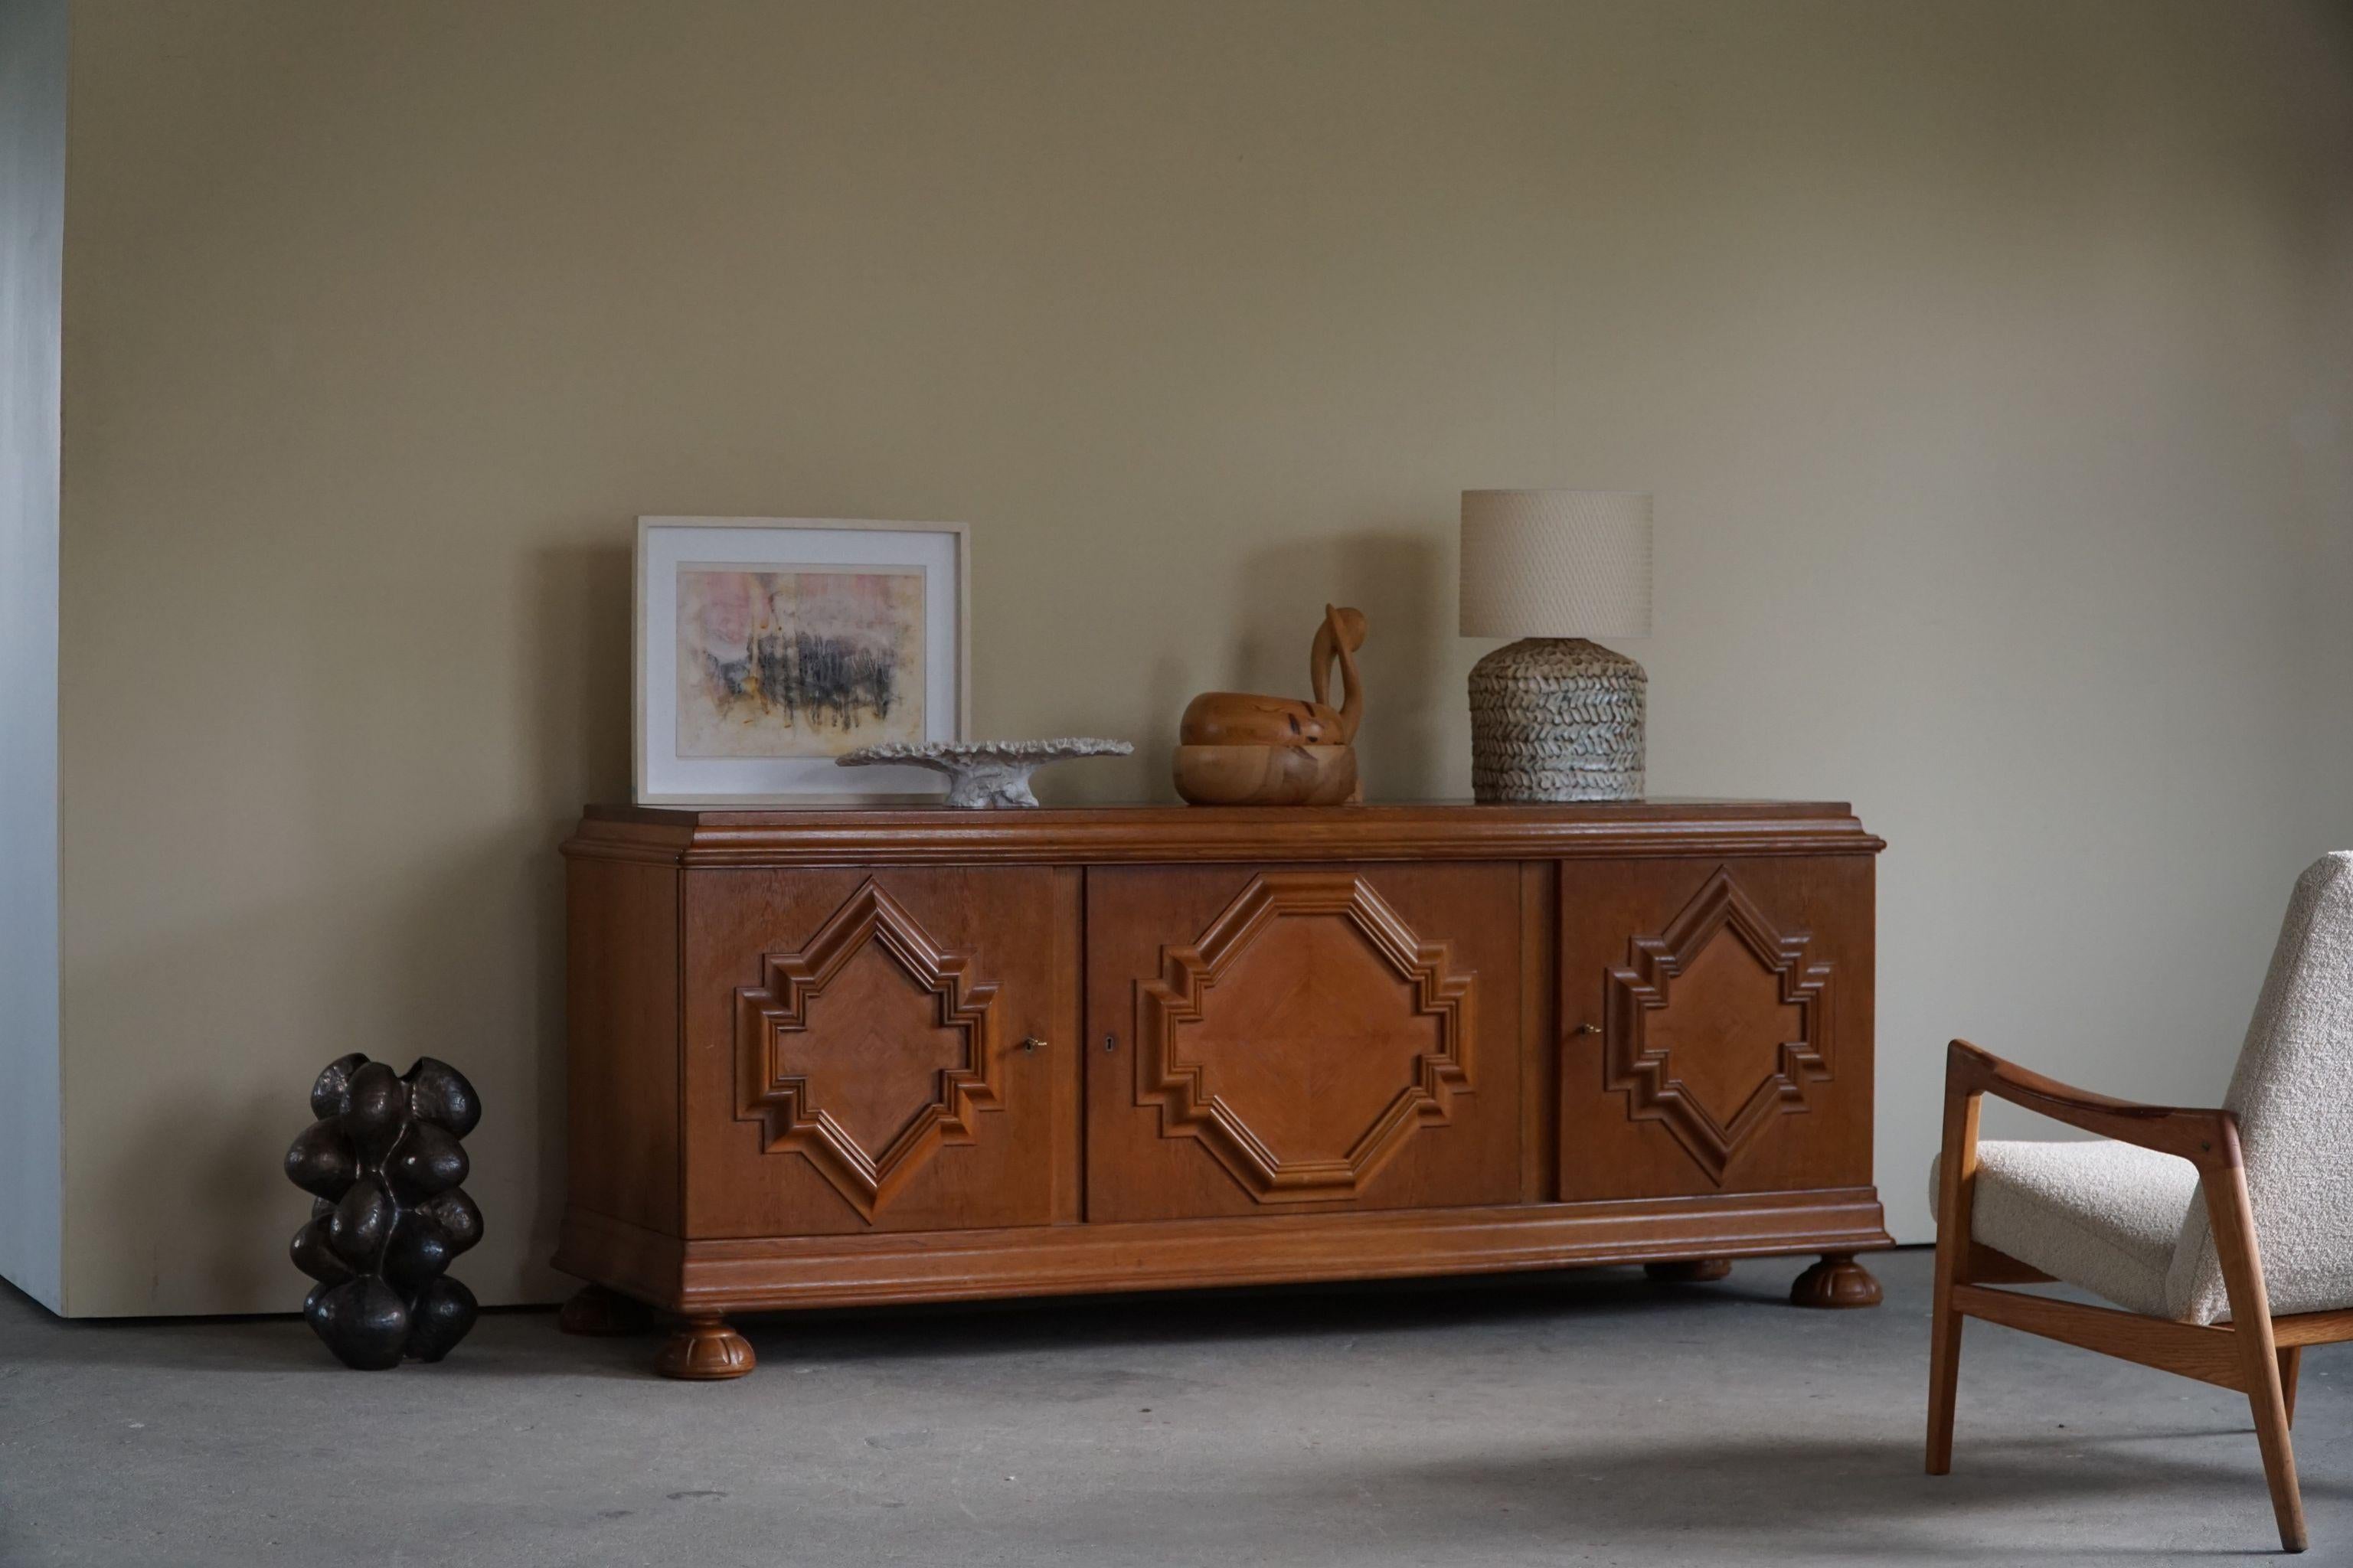 Danish Art Deco sideboard in solid oak, made in the early 20th century. Chunky legs and a sculptural front, this sideboard can easily be paired with modern interior. Such as other Danish designers, like Wegner or a Swan from Arne Jacobsen.